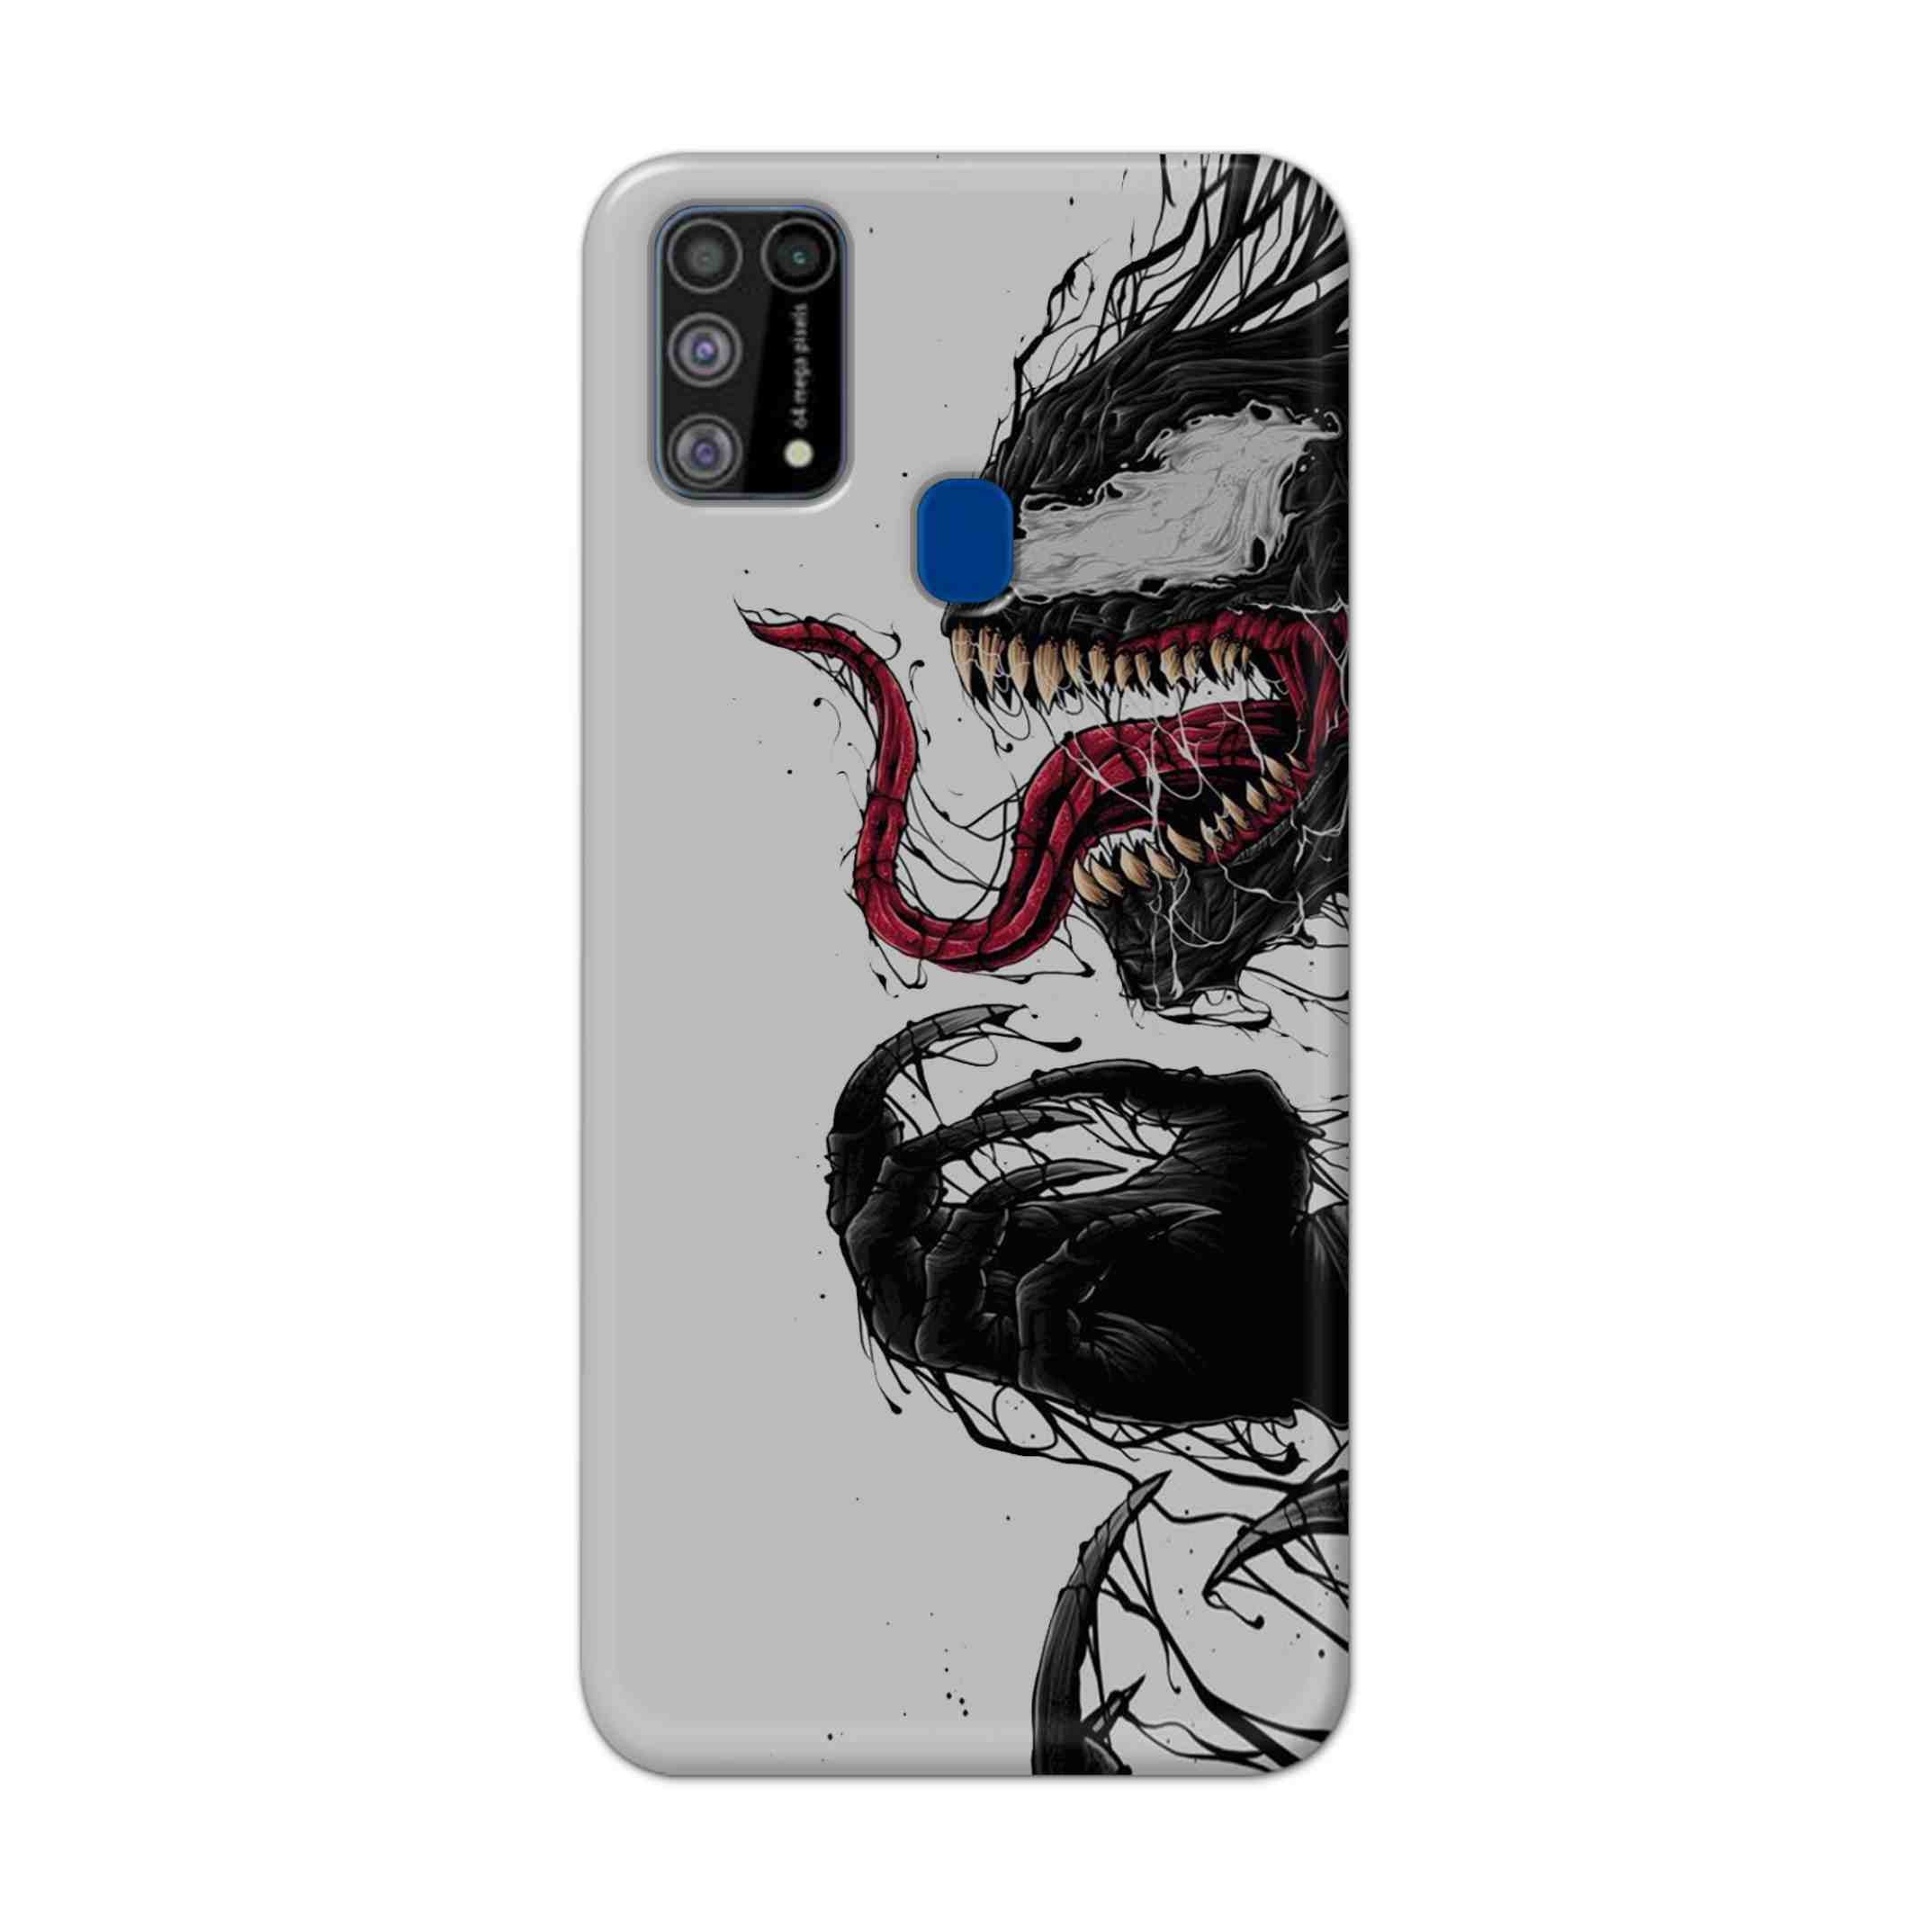 Buy Venom Crazy Hard Back Mobile Phone Case Cover For Samsung Galaxy M31 Online